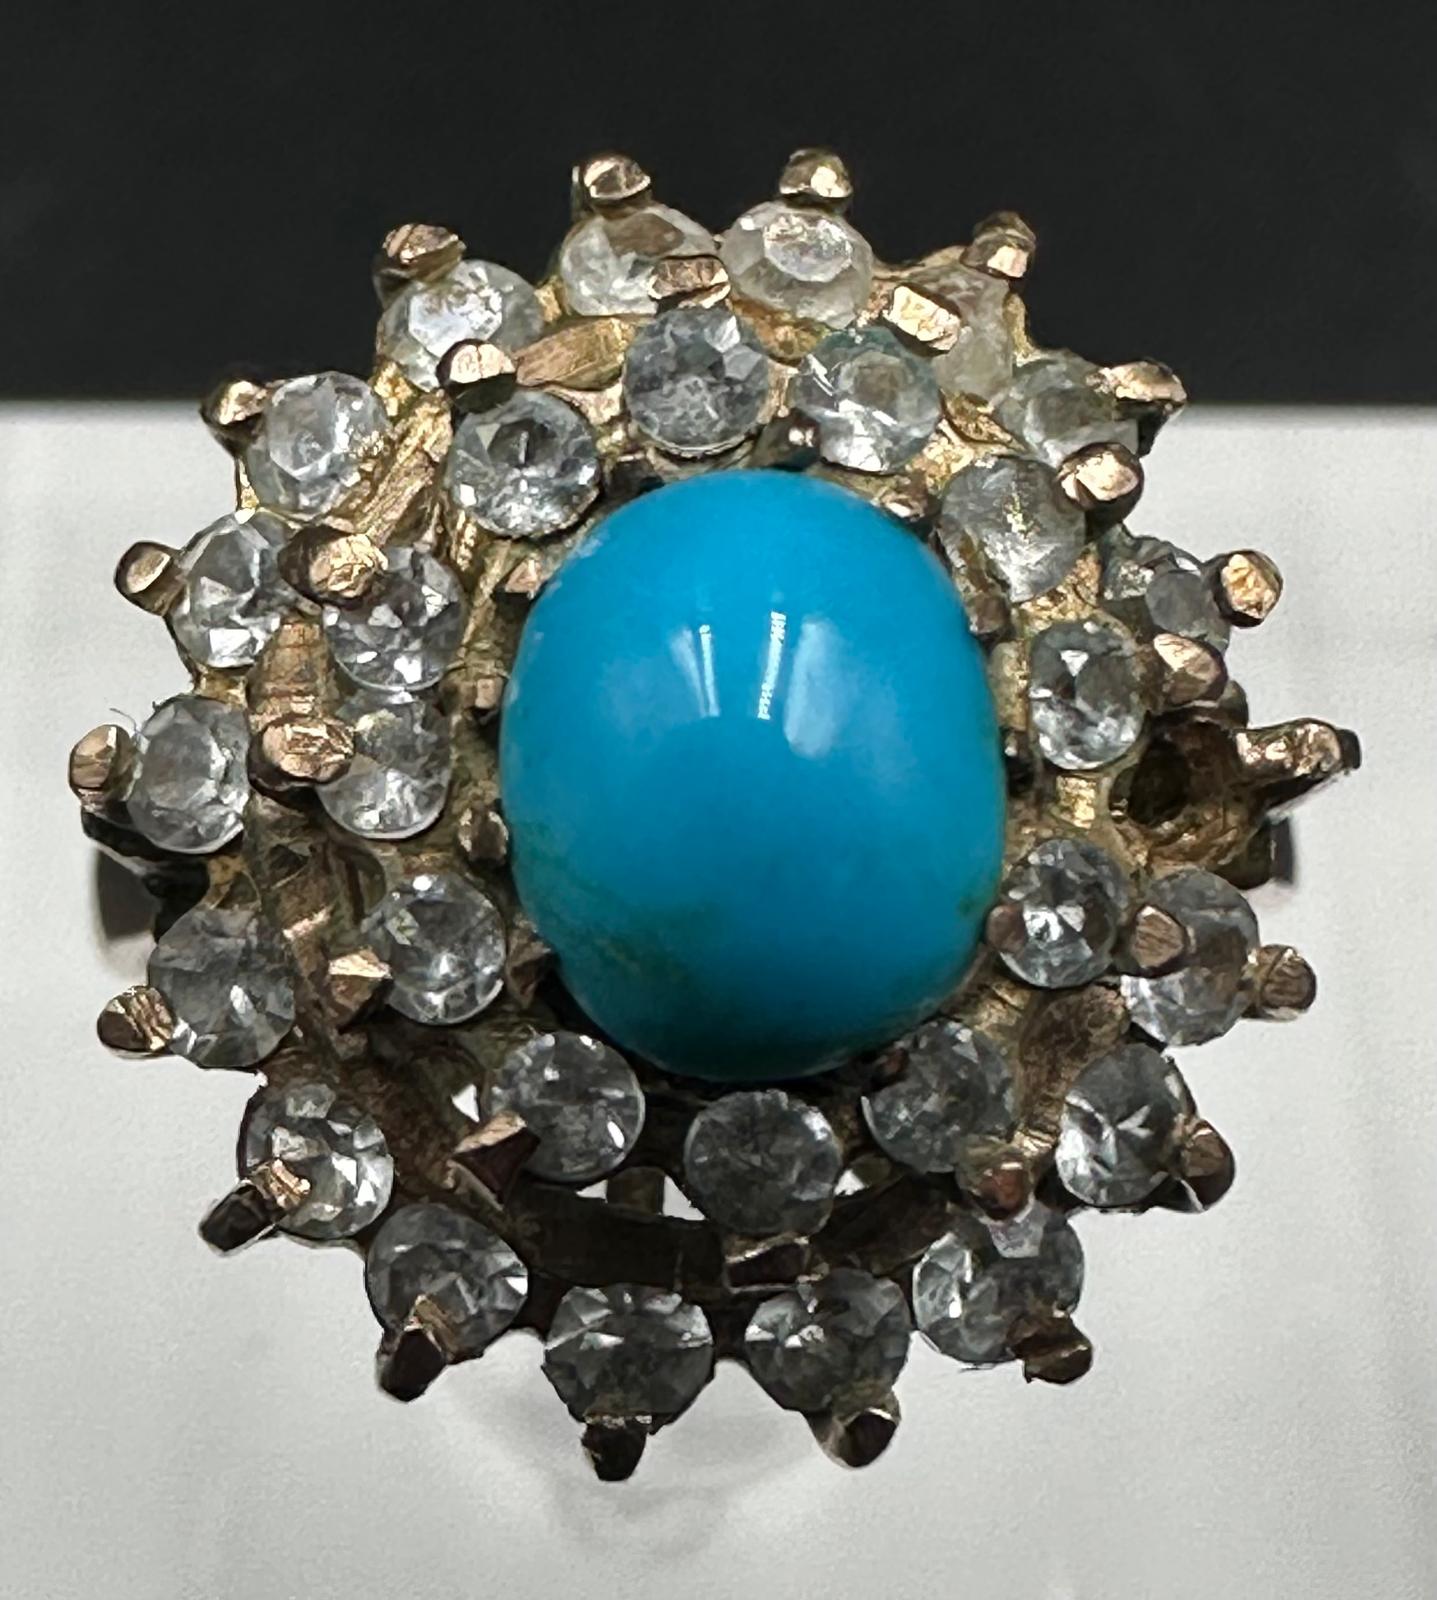 A turquoise central stone ring surrounded by clear stones on gold metal setting. - Image 2 of 3